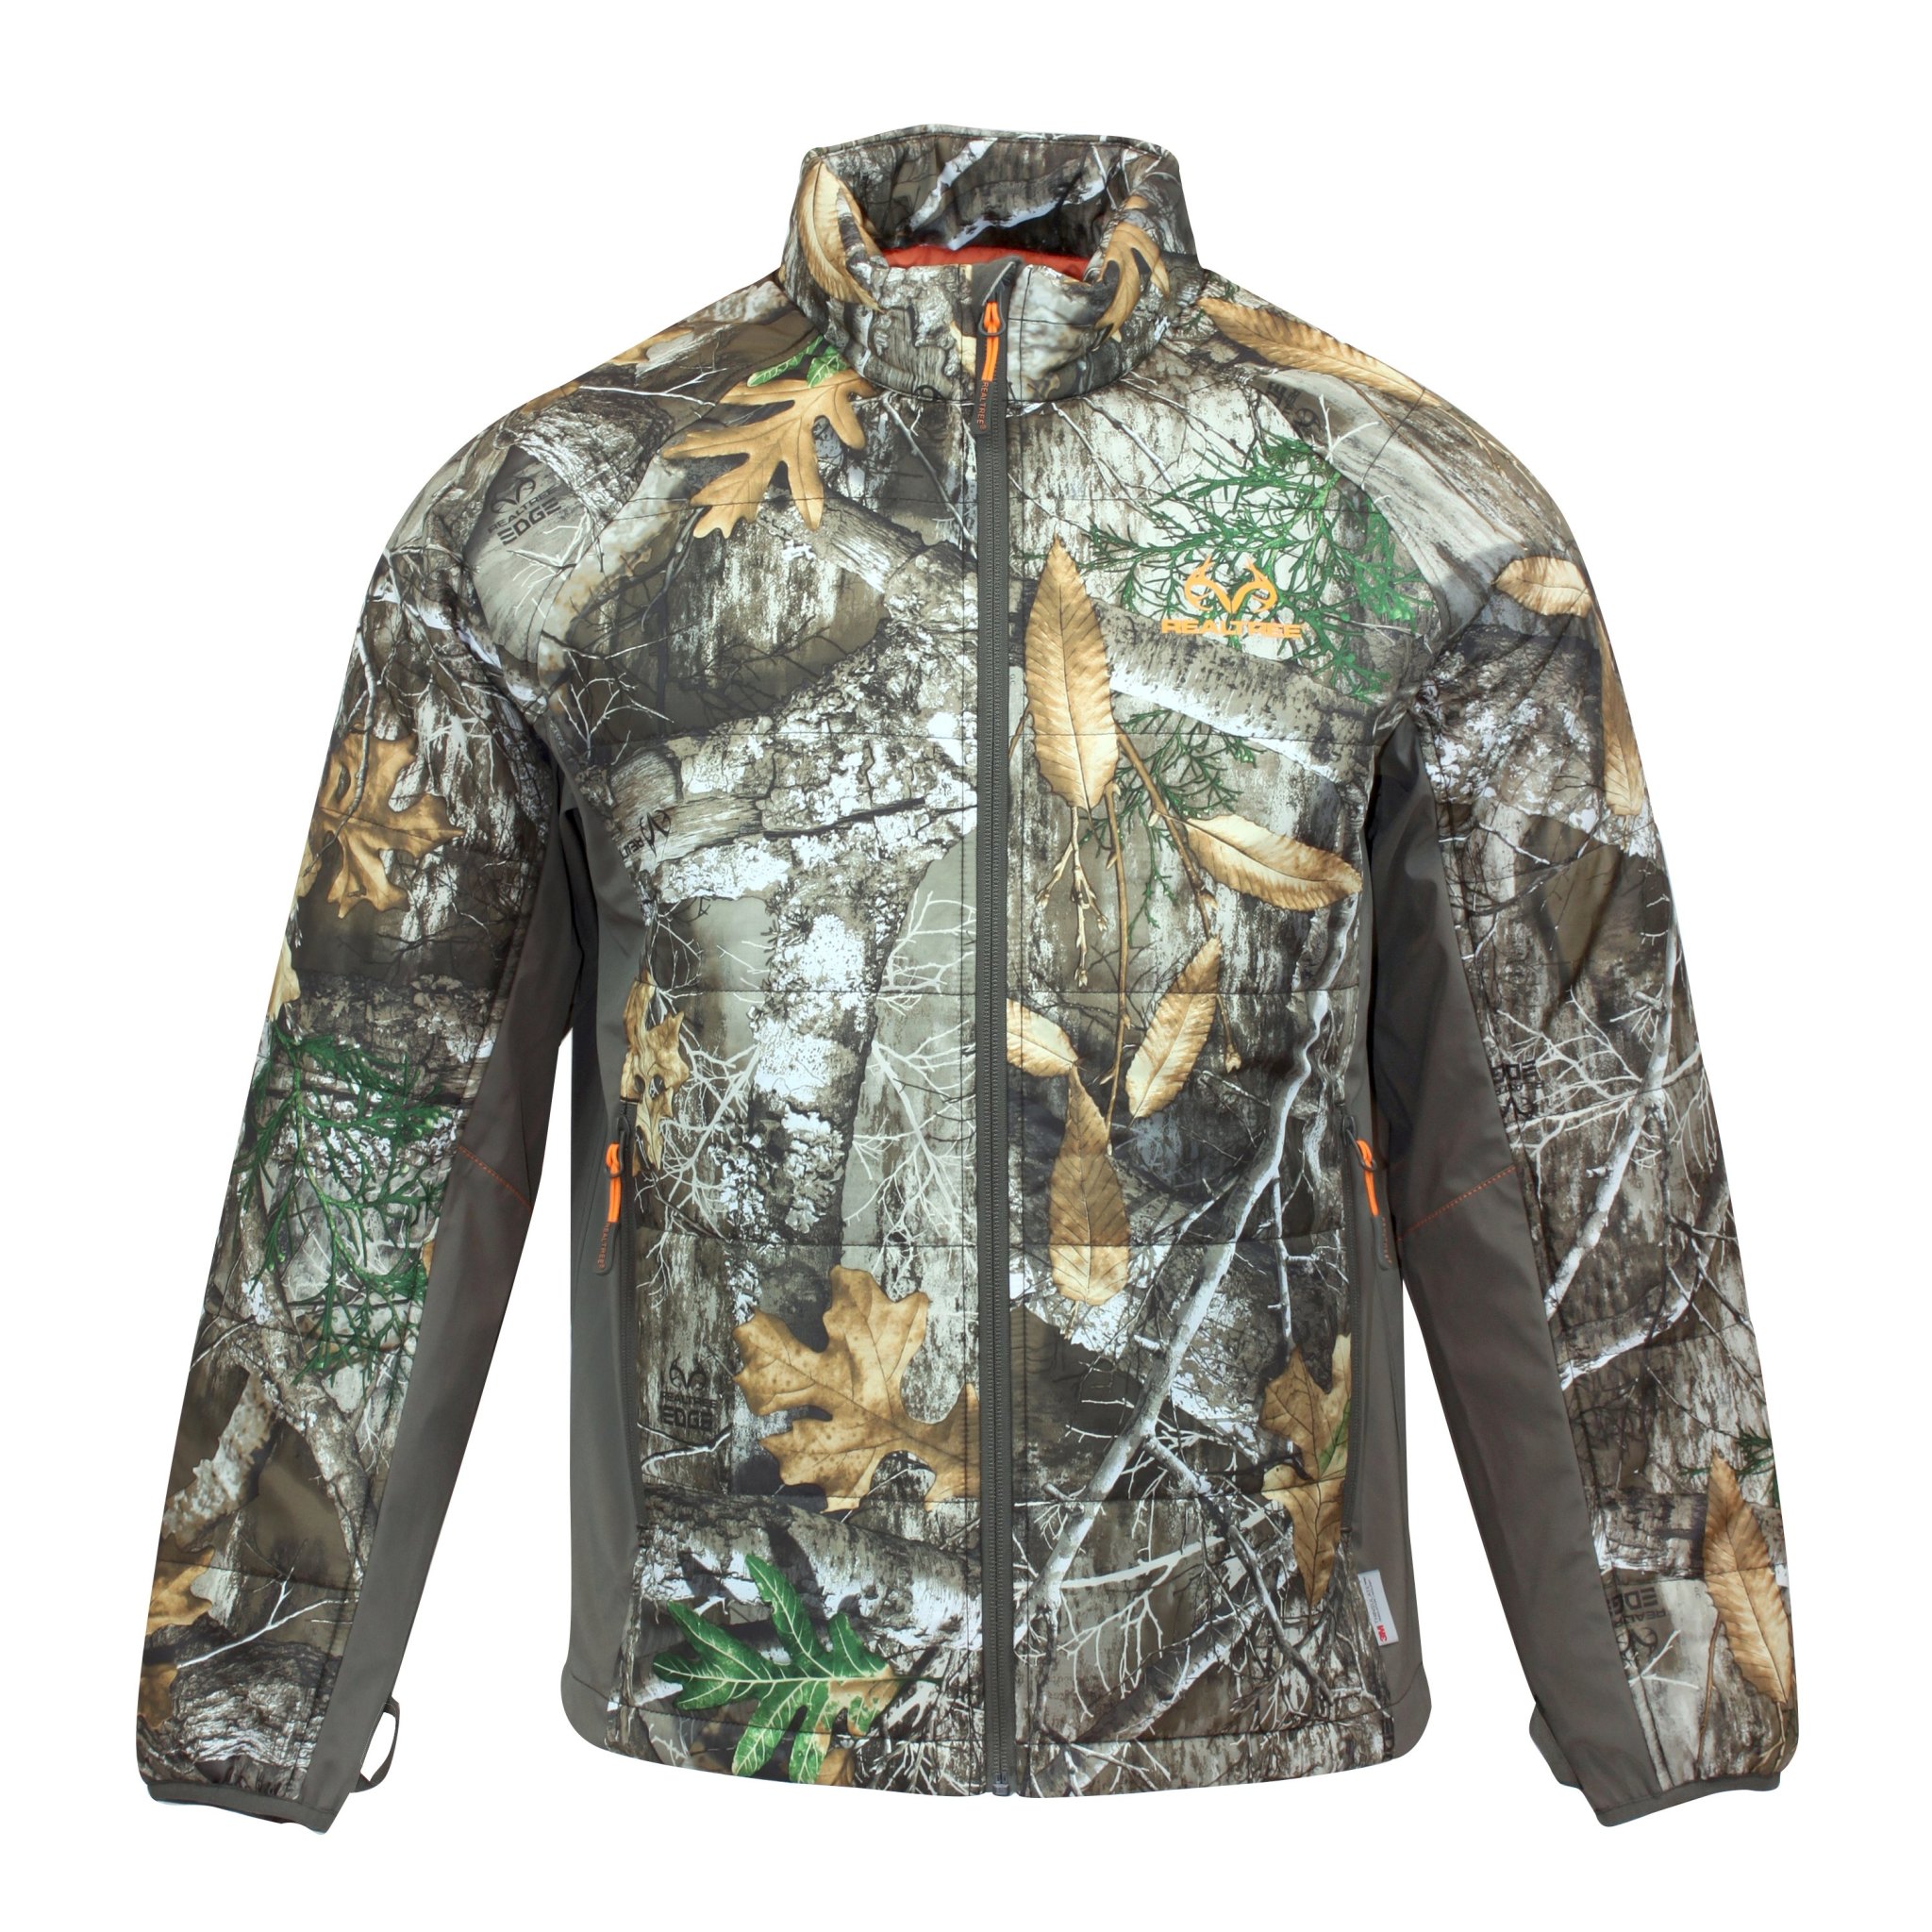 Realtree Men's Insulated Jacket